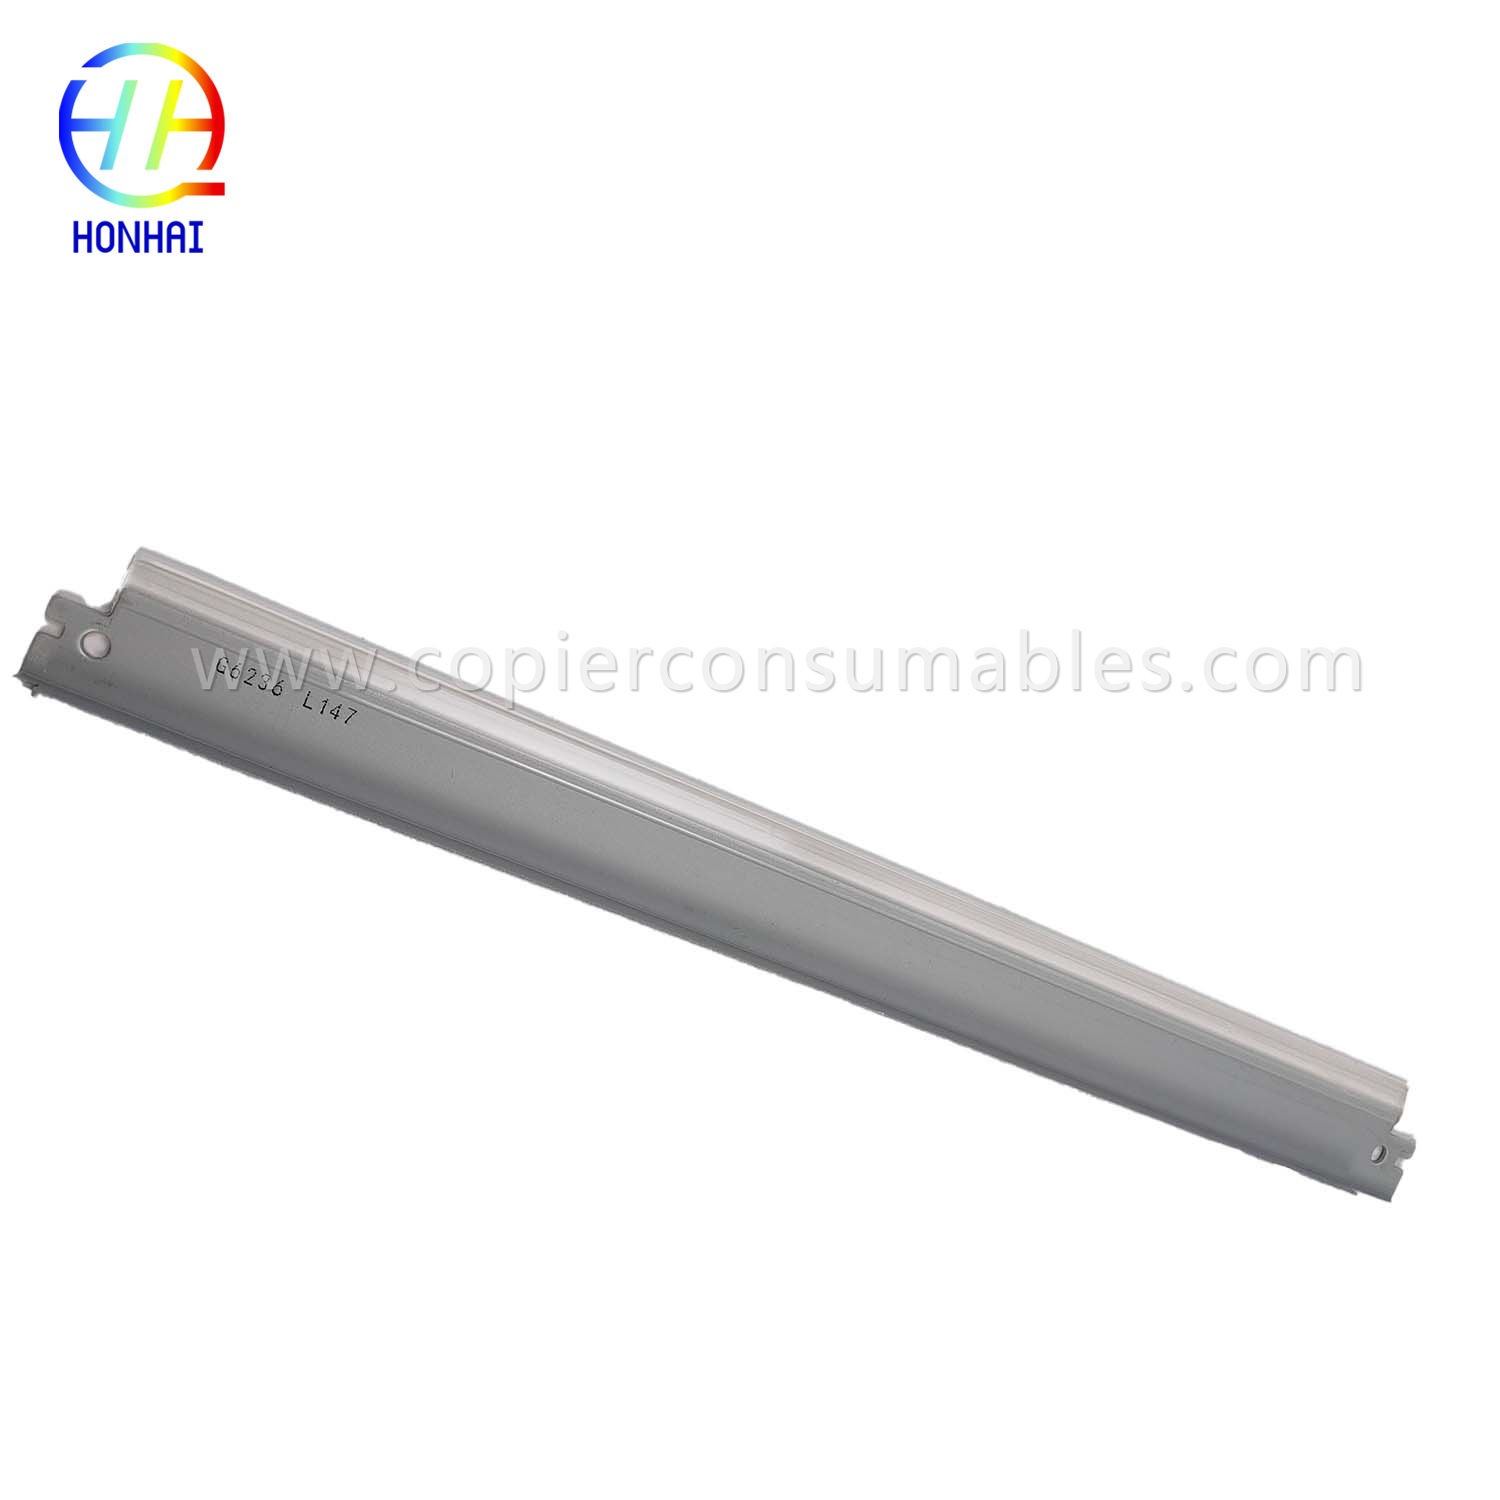 Drum Cleaning Blade សម្រាប់ Canon imageRUNNER 2200 2230 2270 2800 2830 2870 3025 3030 3035 3045 3225 3230 3235 3245 3300 3320I5723 (NPR) 3300 3320I5723拷贝